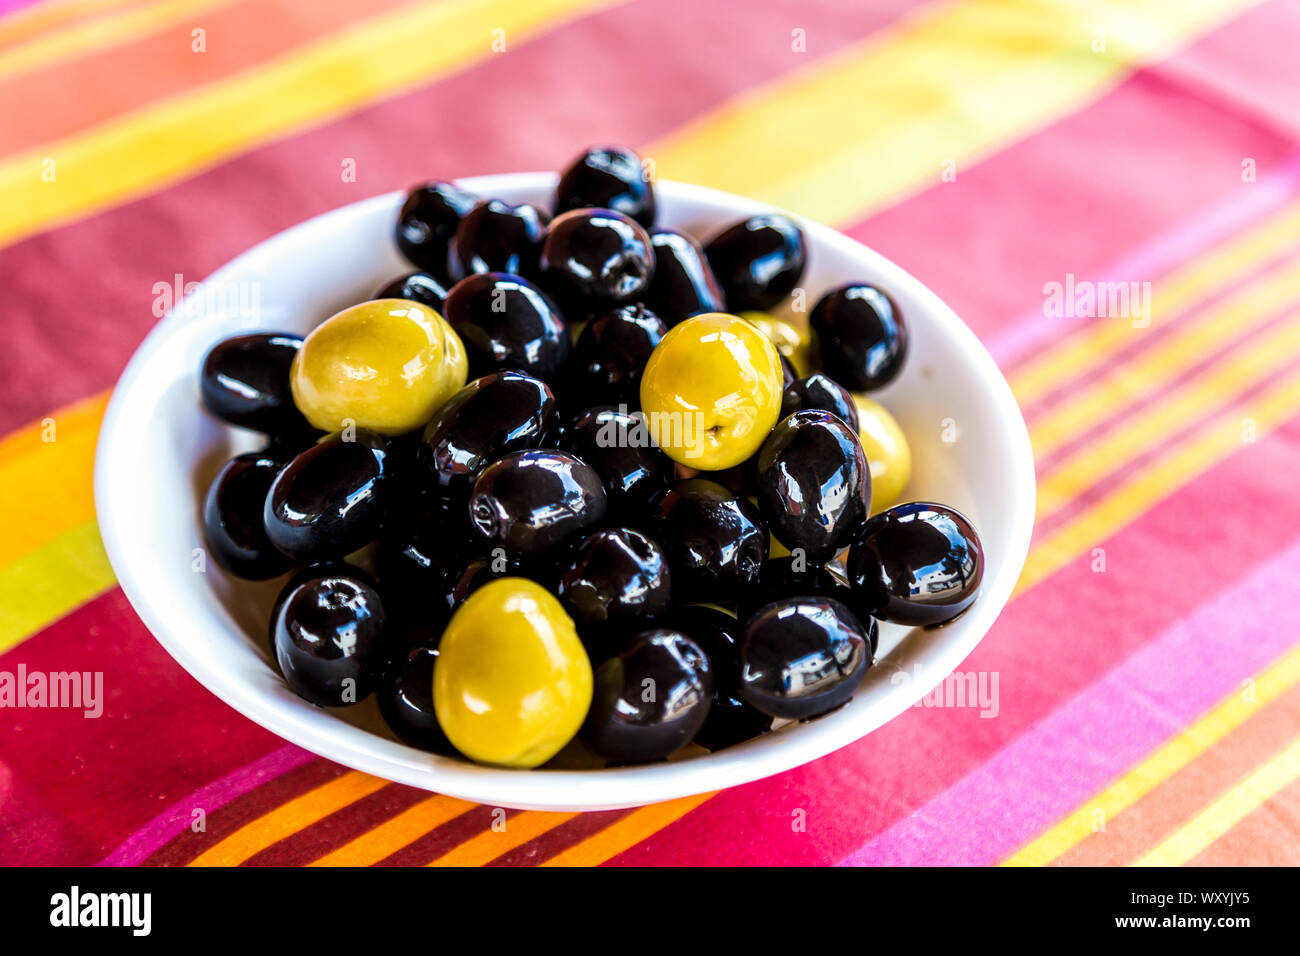 Green and black olives in a bowl on a colourful striped tablecloth Stock Photo